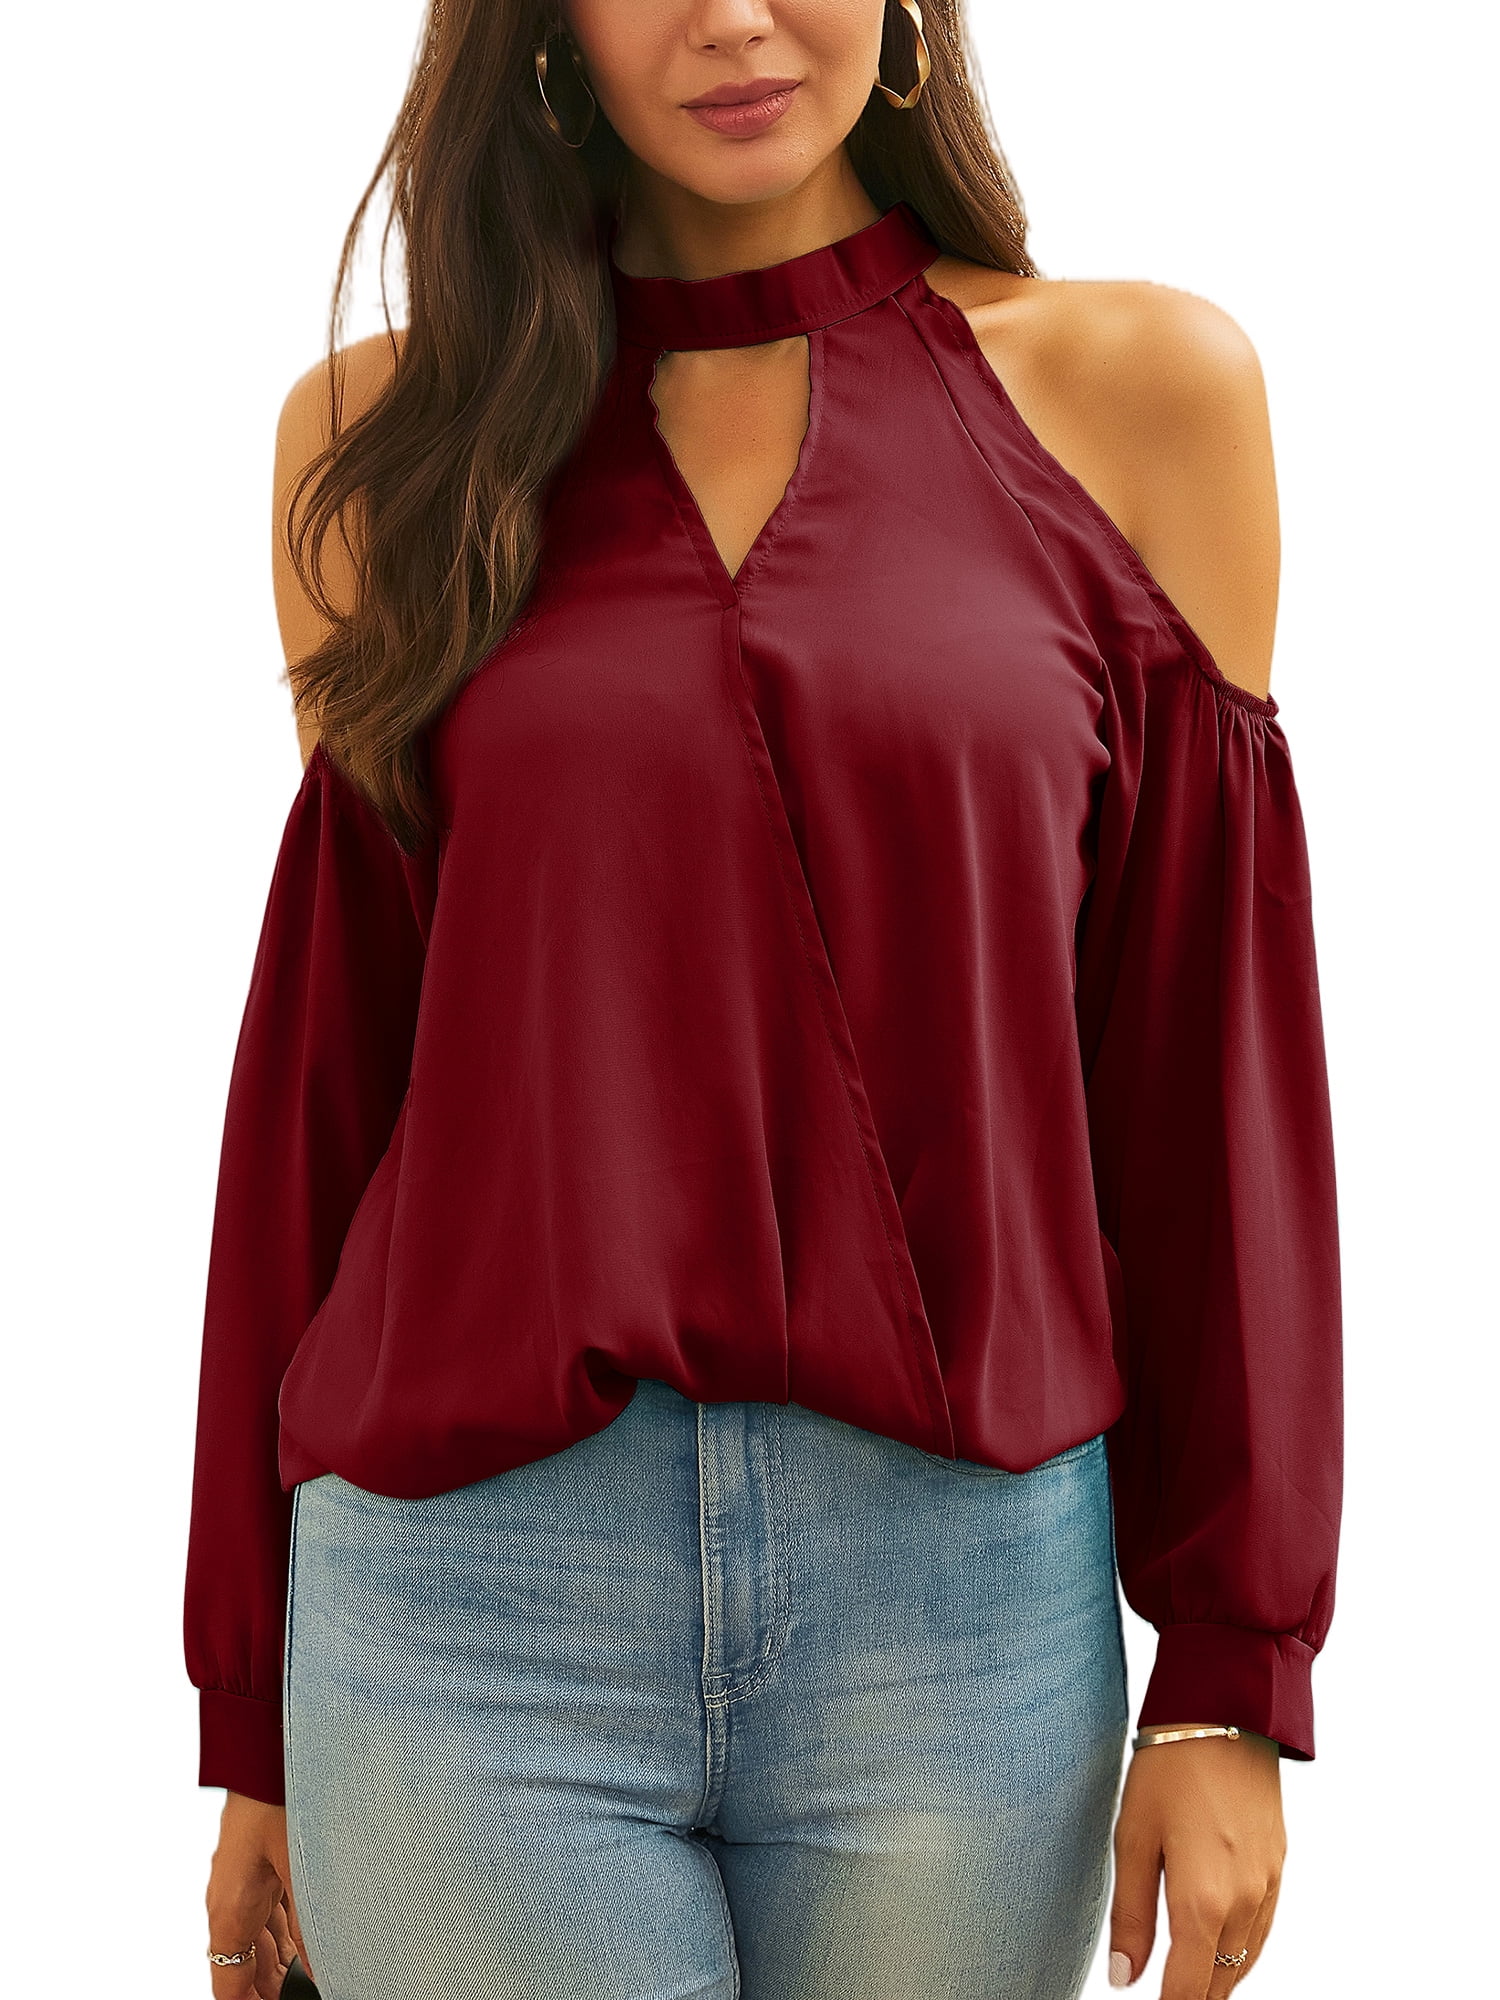 Halloween Blouse for Women,Women's Casual Loose Cold Shoulder Tops Halter Neck Hollowed Out Long Sleeve Shirts 